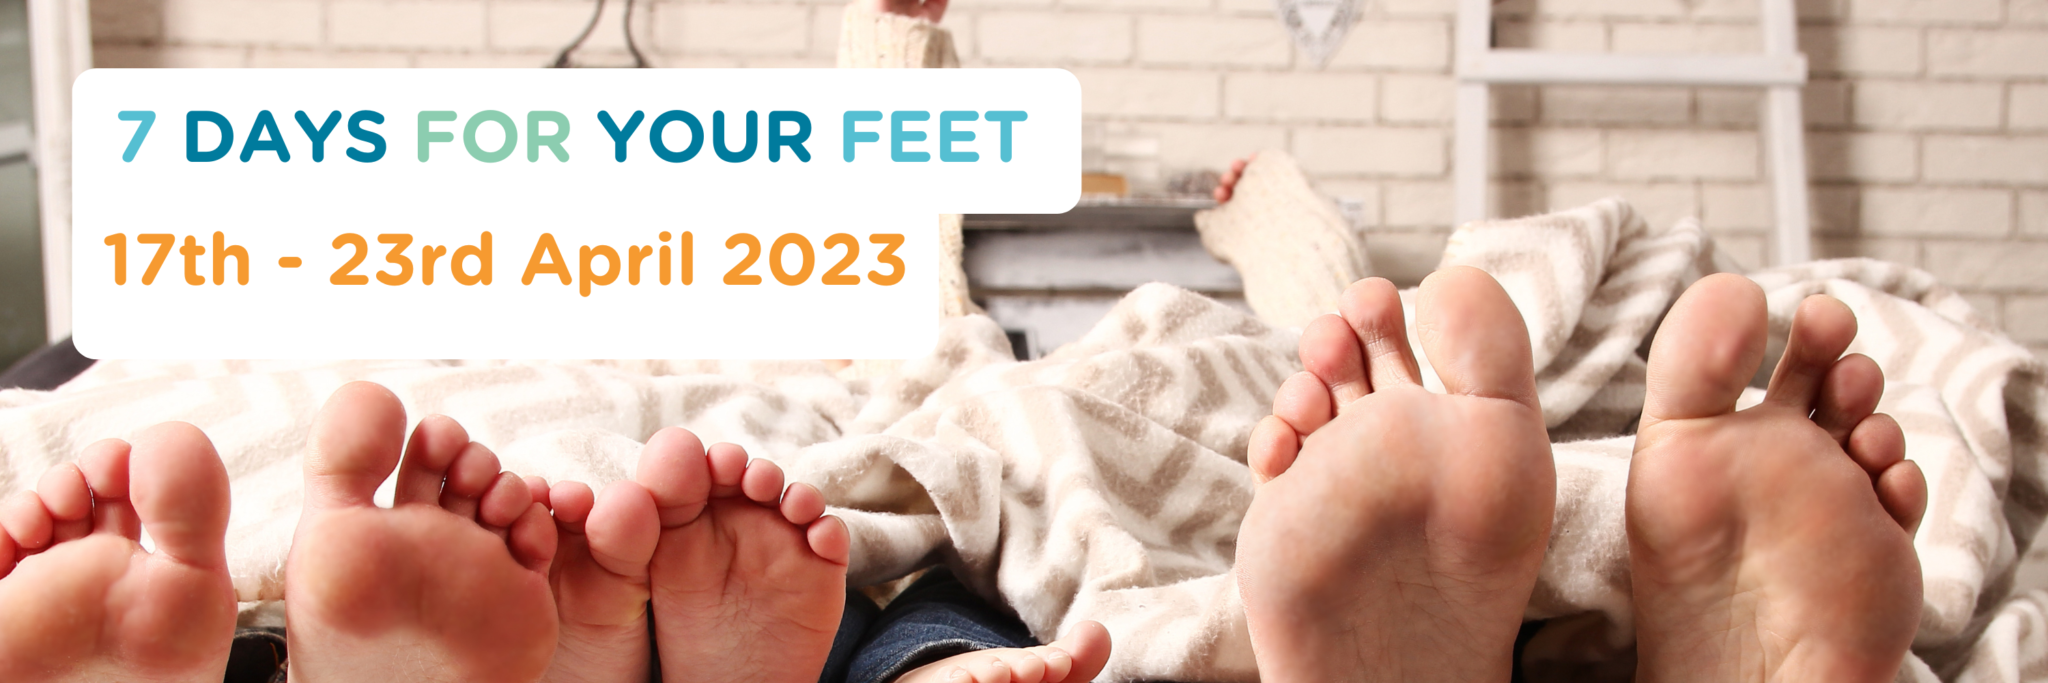 National feet week banner - 7 days for you feet 17th - 23rd April 2023